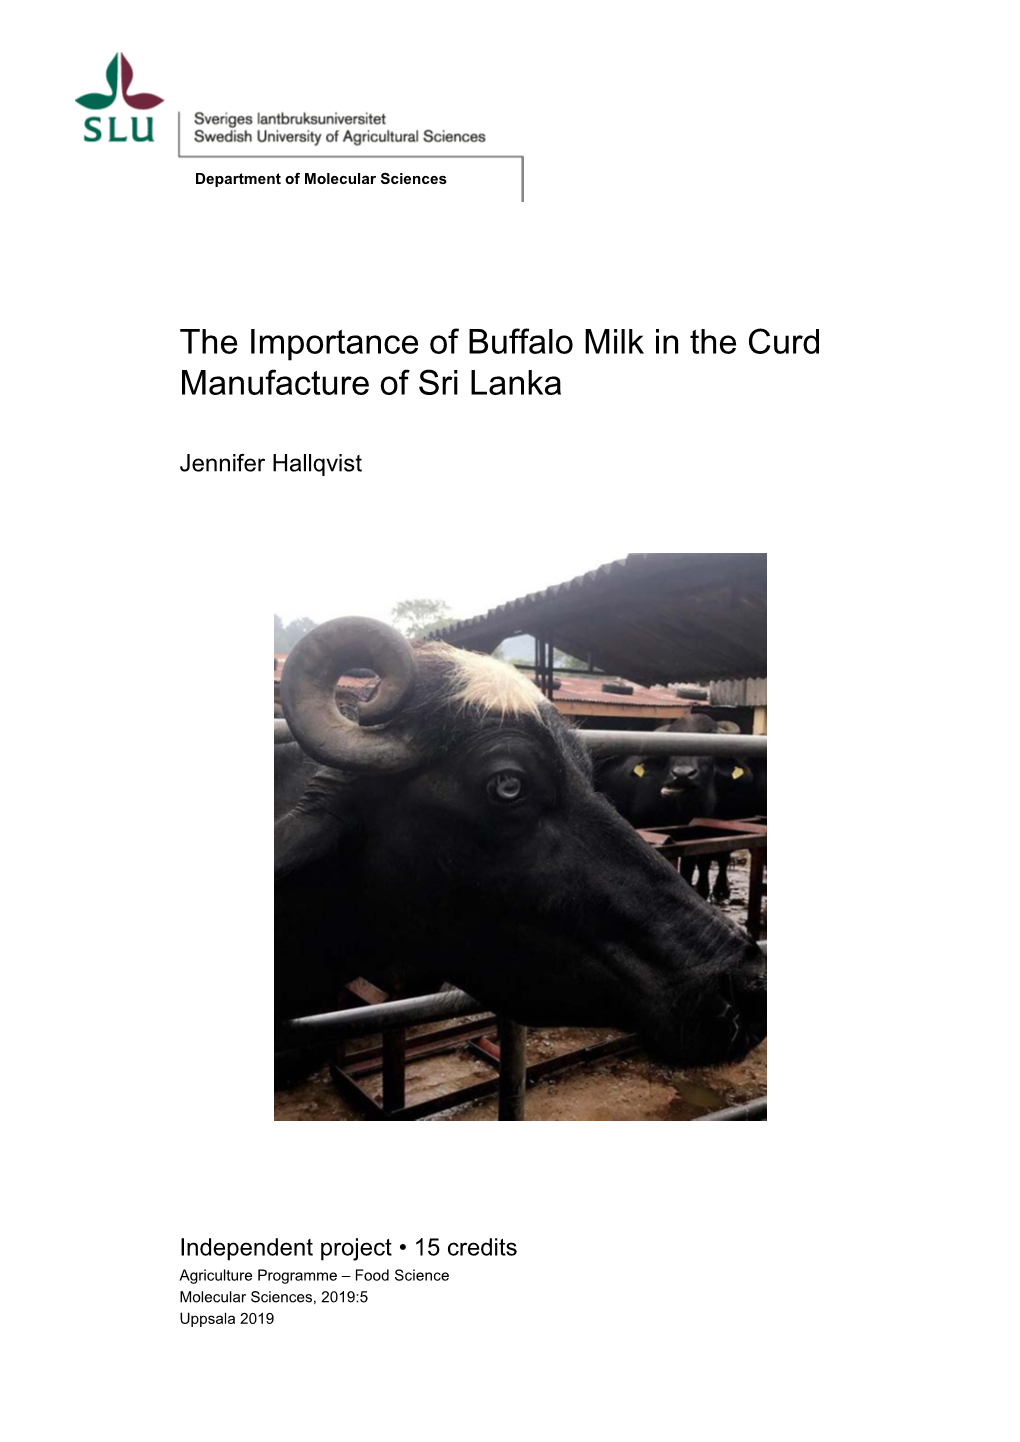 The Importance of Buffalo Milk in the Curd Manufacture of Sri Lanka